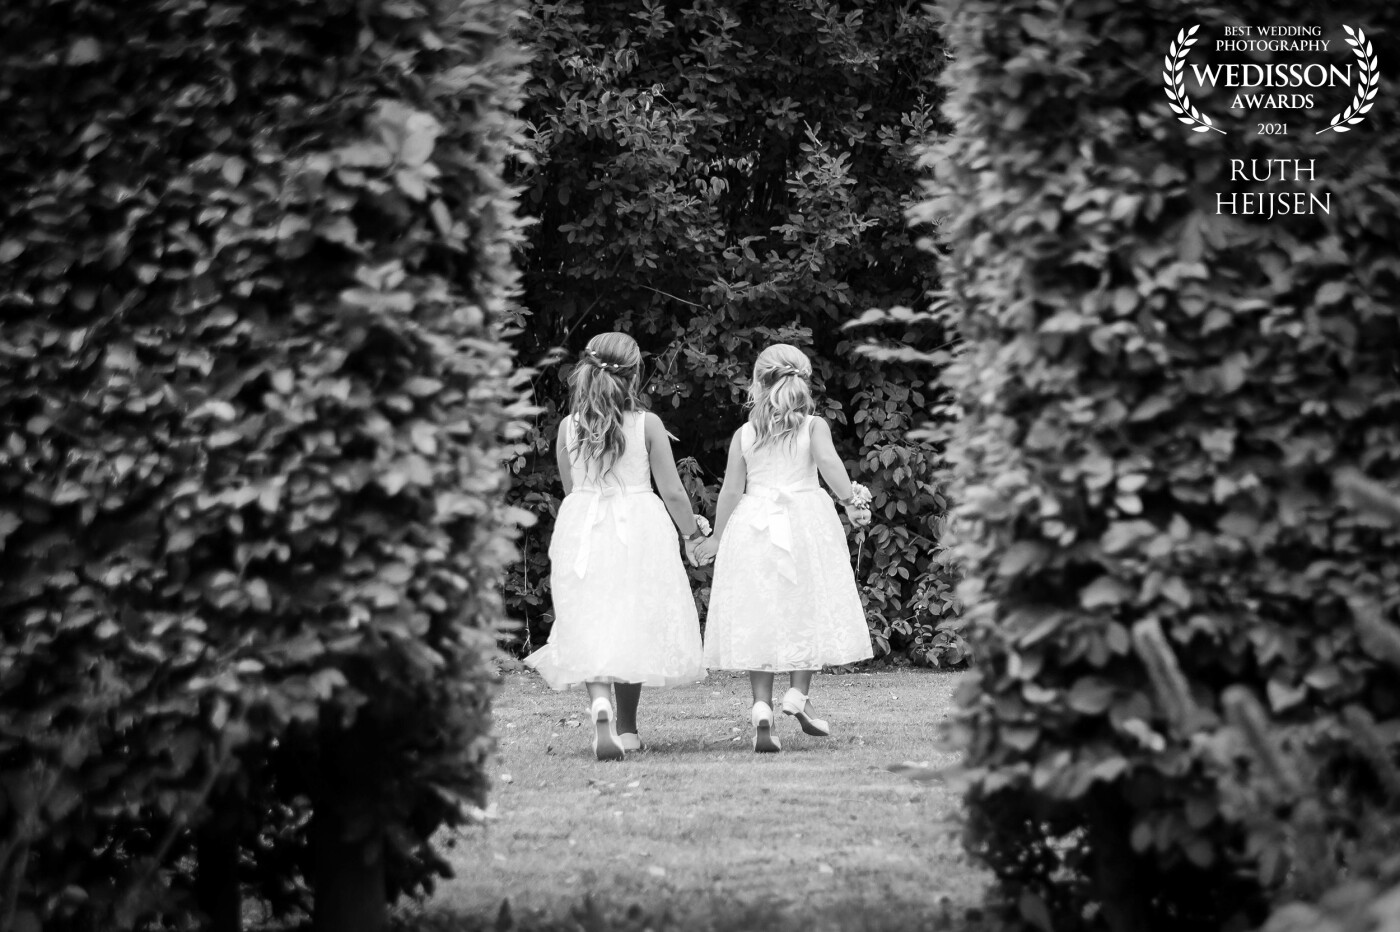 These little bridesmaids loved exploring, playing and dancing in the garden during the reception. Aren't they look lovely together?